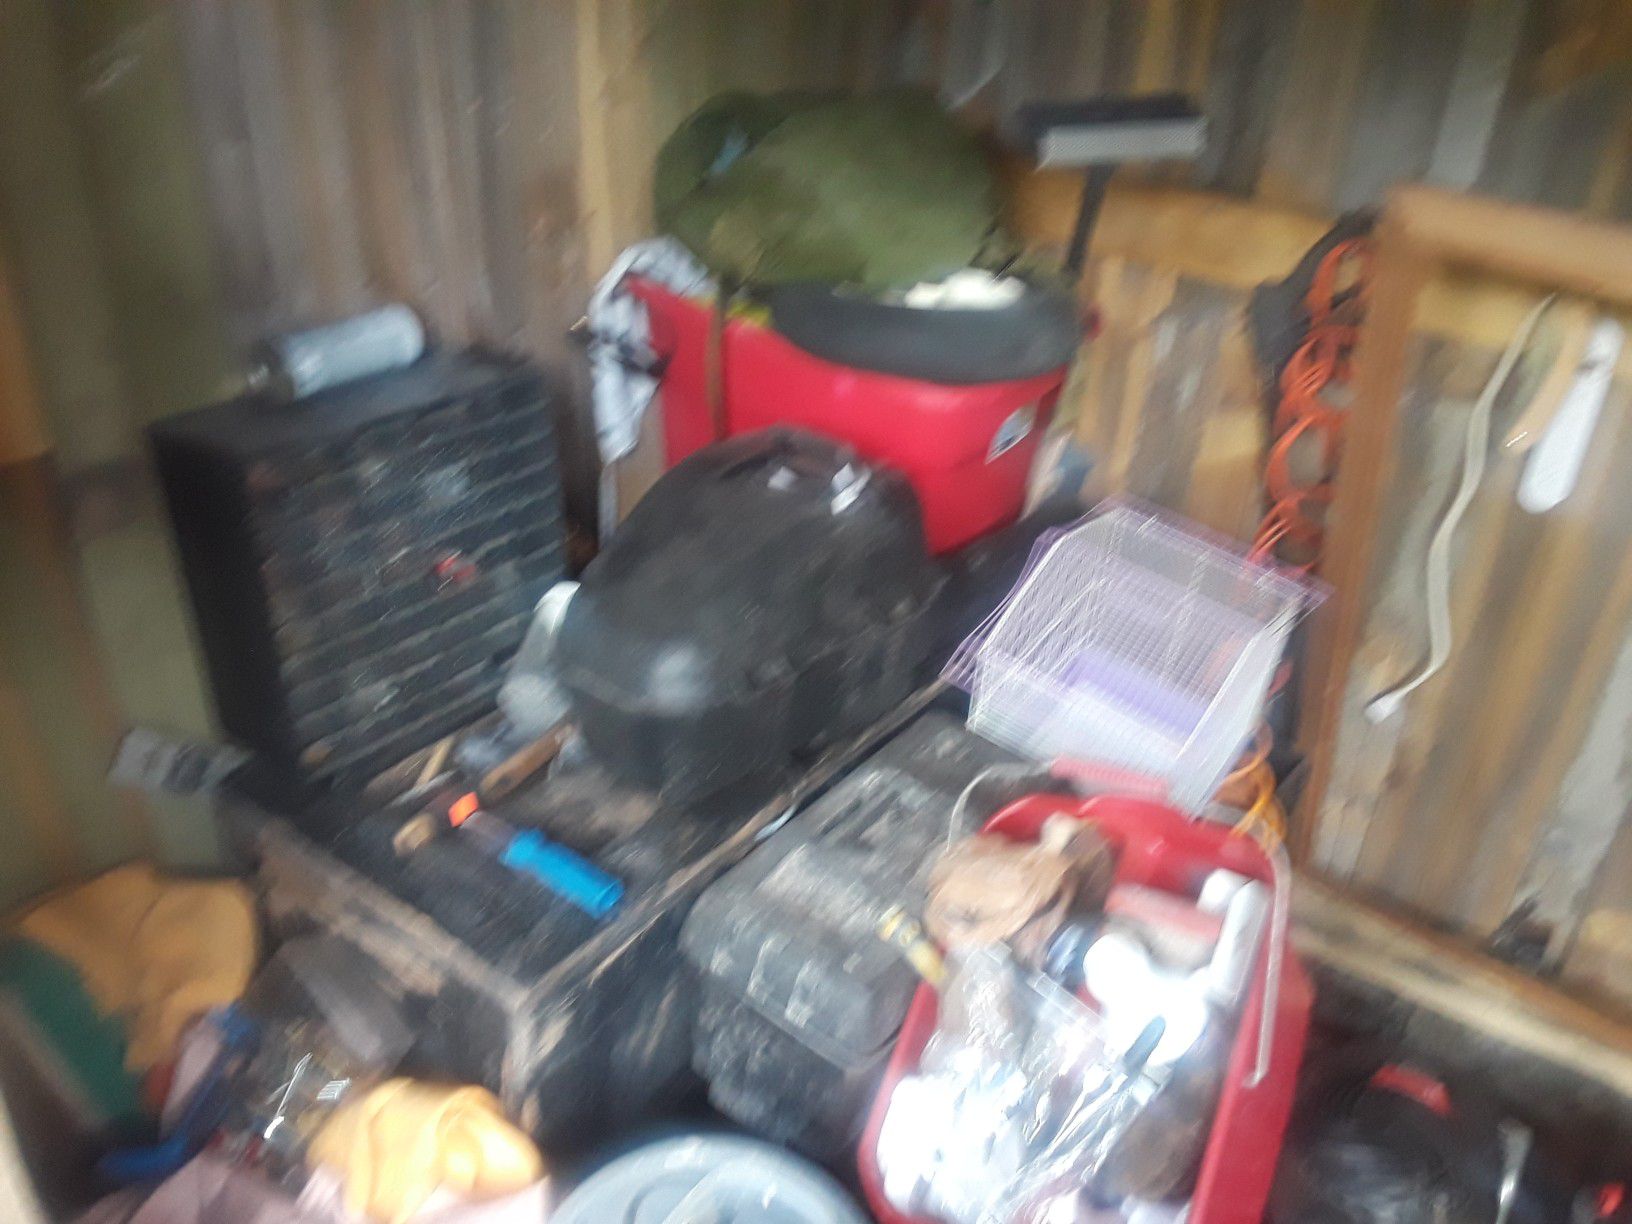 Compressor . Craftsman chainsaw in case. Lots of tools will let all go . Lawn mowers not for sale every thing else must go